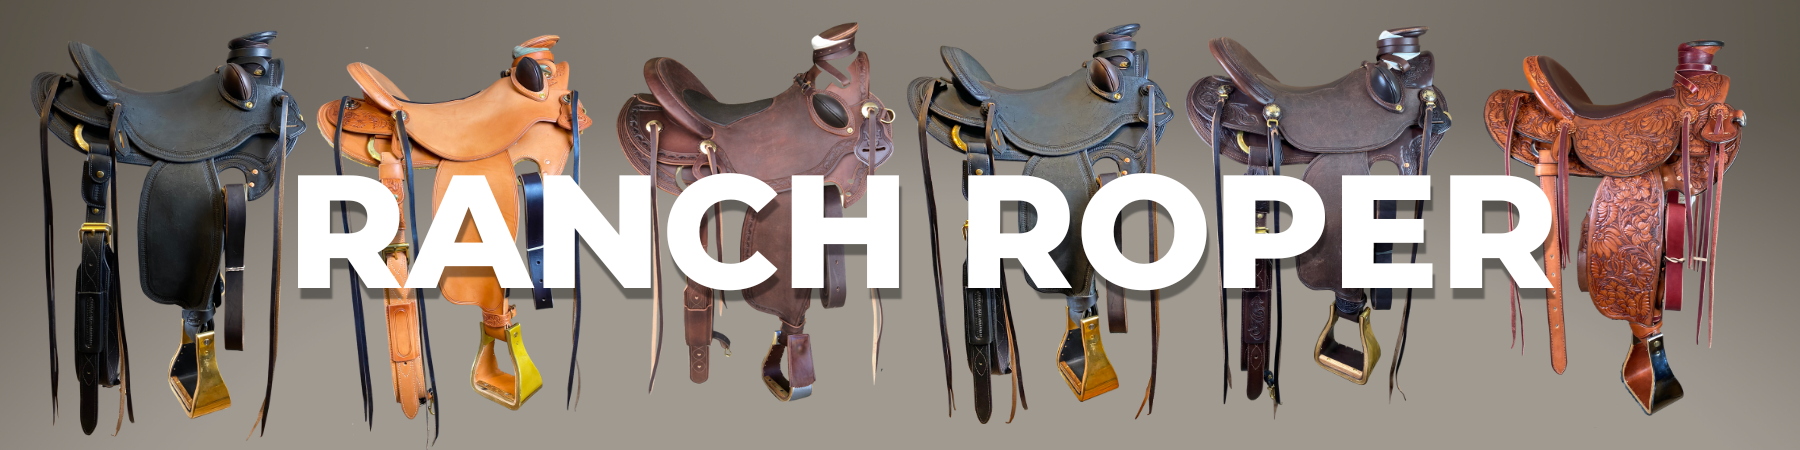 ranch roper saddle overview